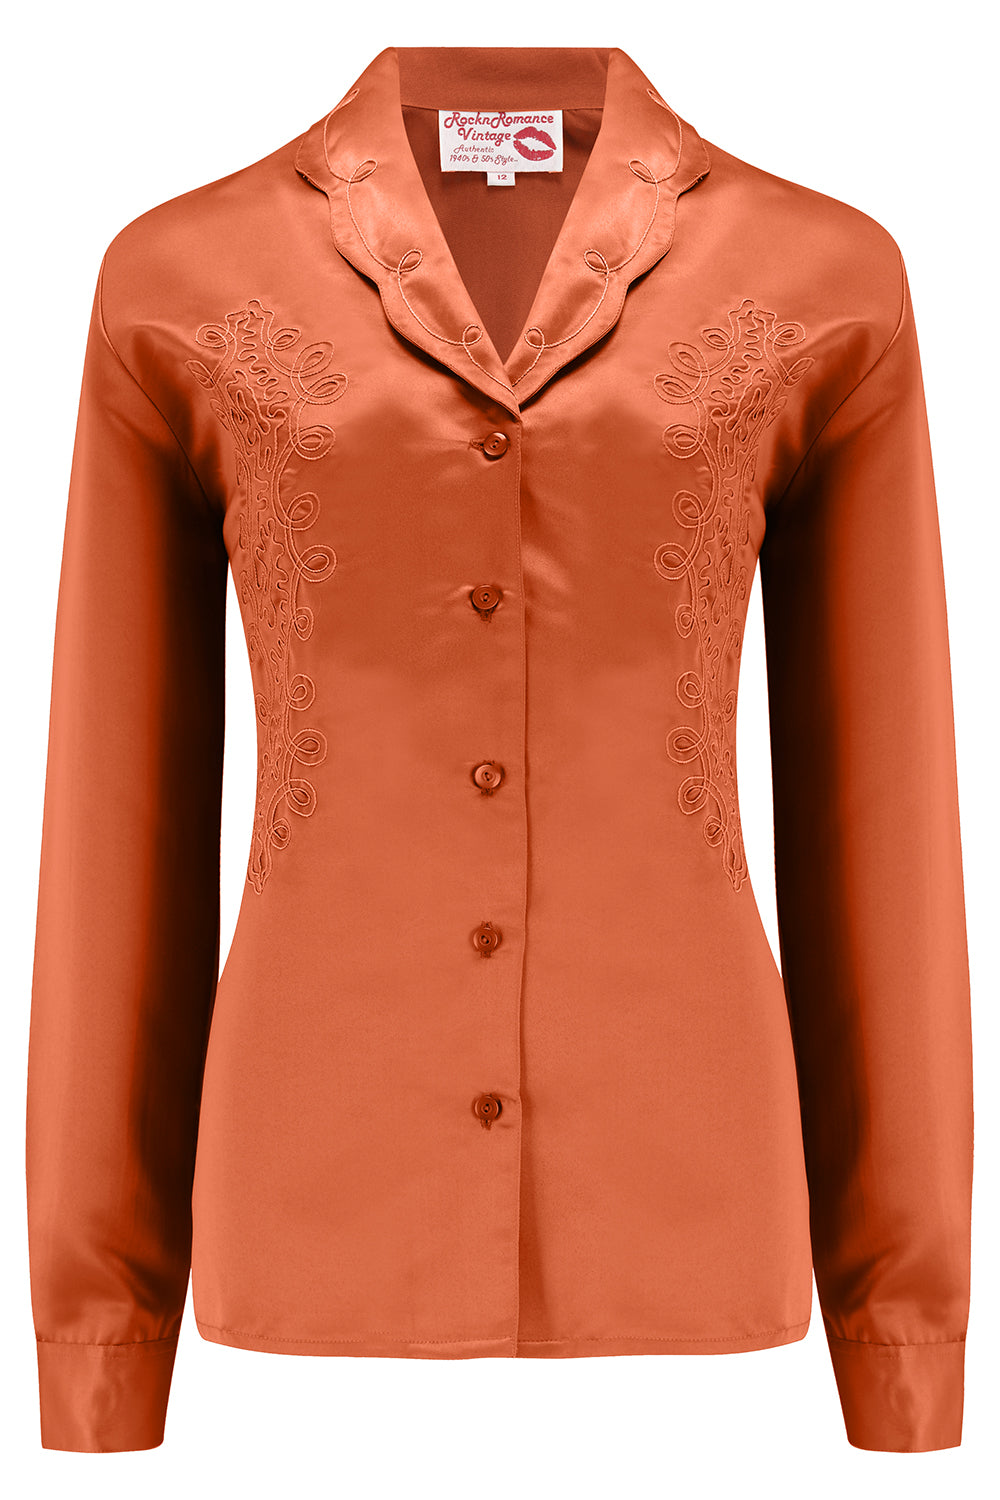 RnR "Luxe" Range.. The "Valarie" Long Sleeve Embroidered Blouse in Super Luxurious Burnt Orange SATIN